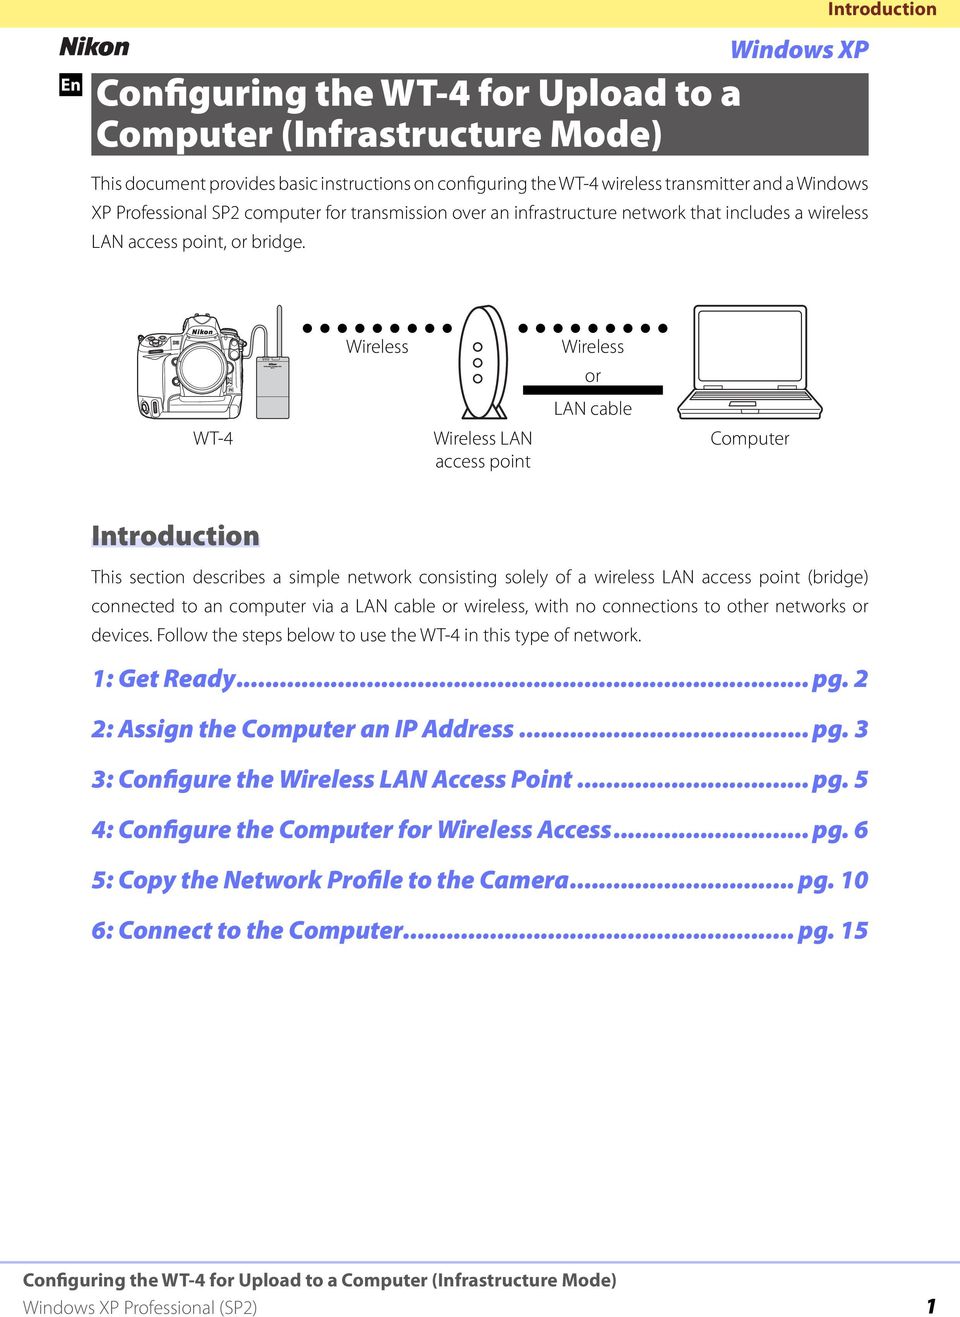 Introduction WT-4 Wireless Wireless LAN access point Wireless or LAN cable Computer Introduction This section describes a simple network consisting solely of a wireless LAN access point (bridge)